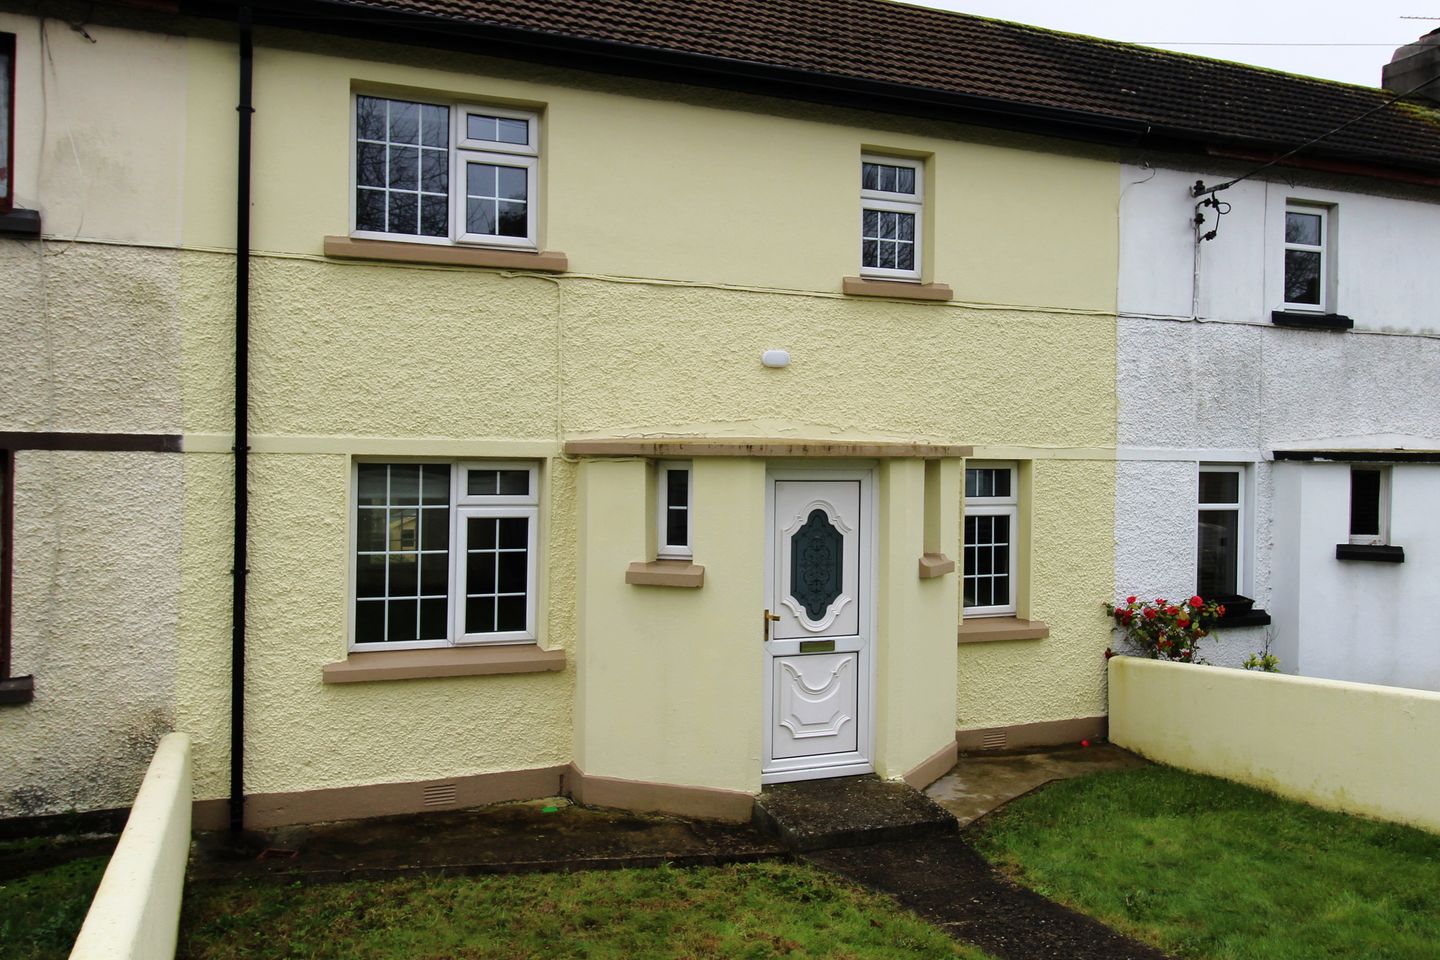 14 Walsh's Place, Kilmacthomas, Co. Waterford, X42F721